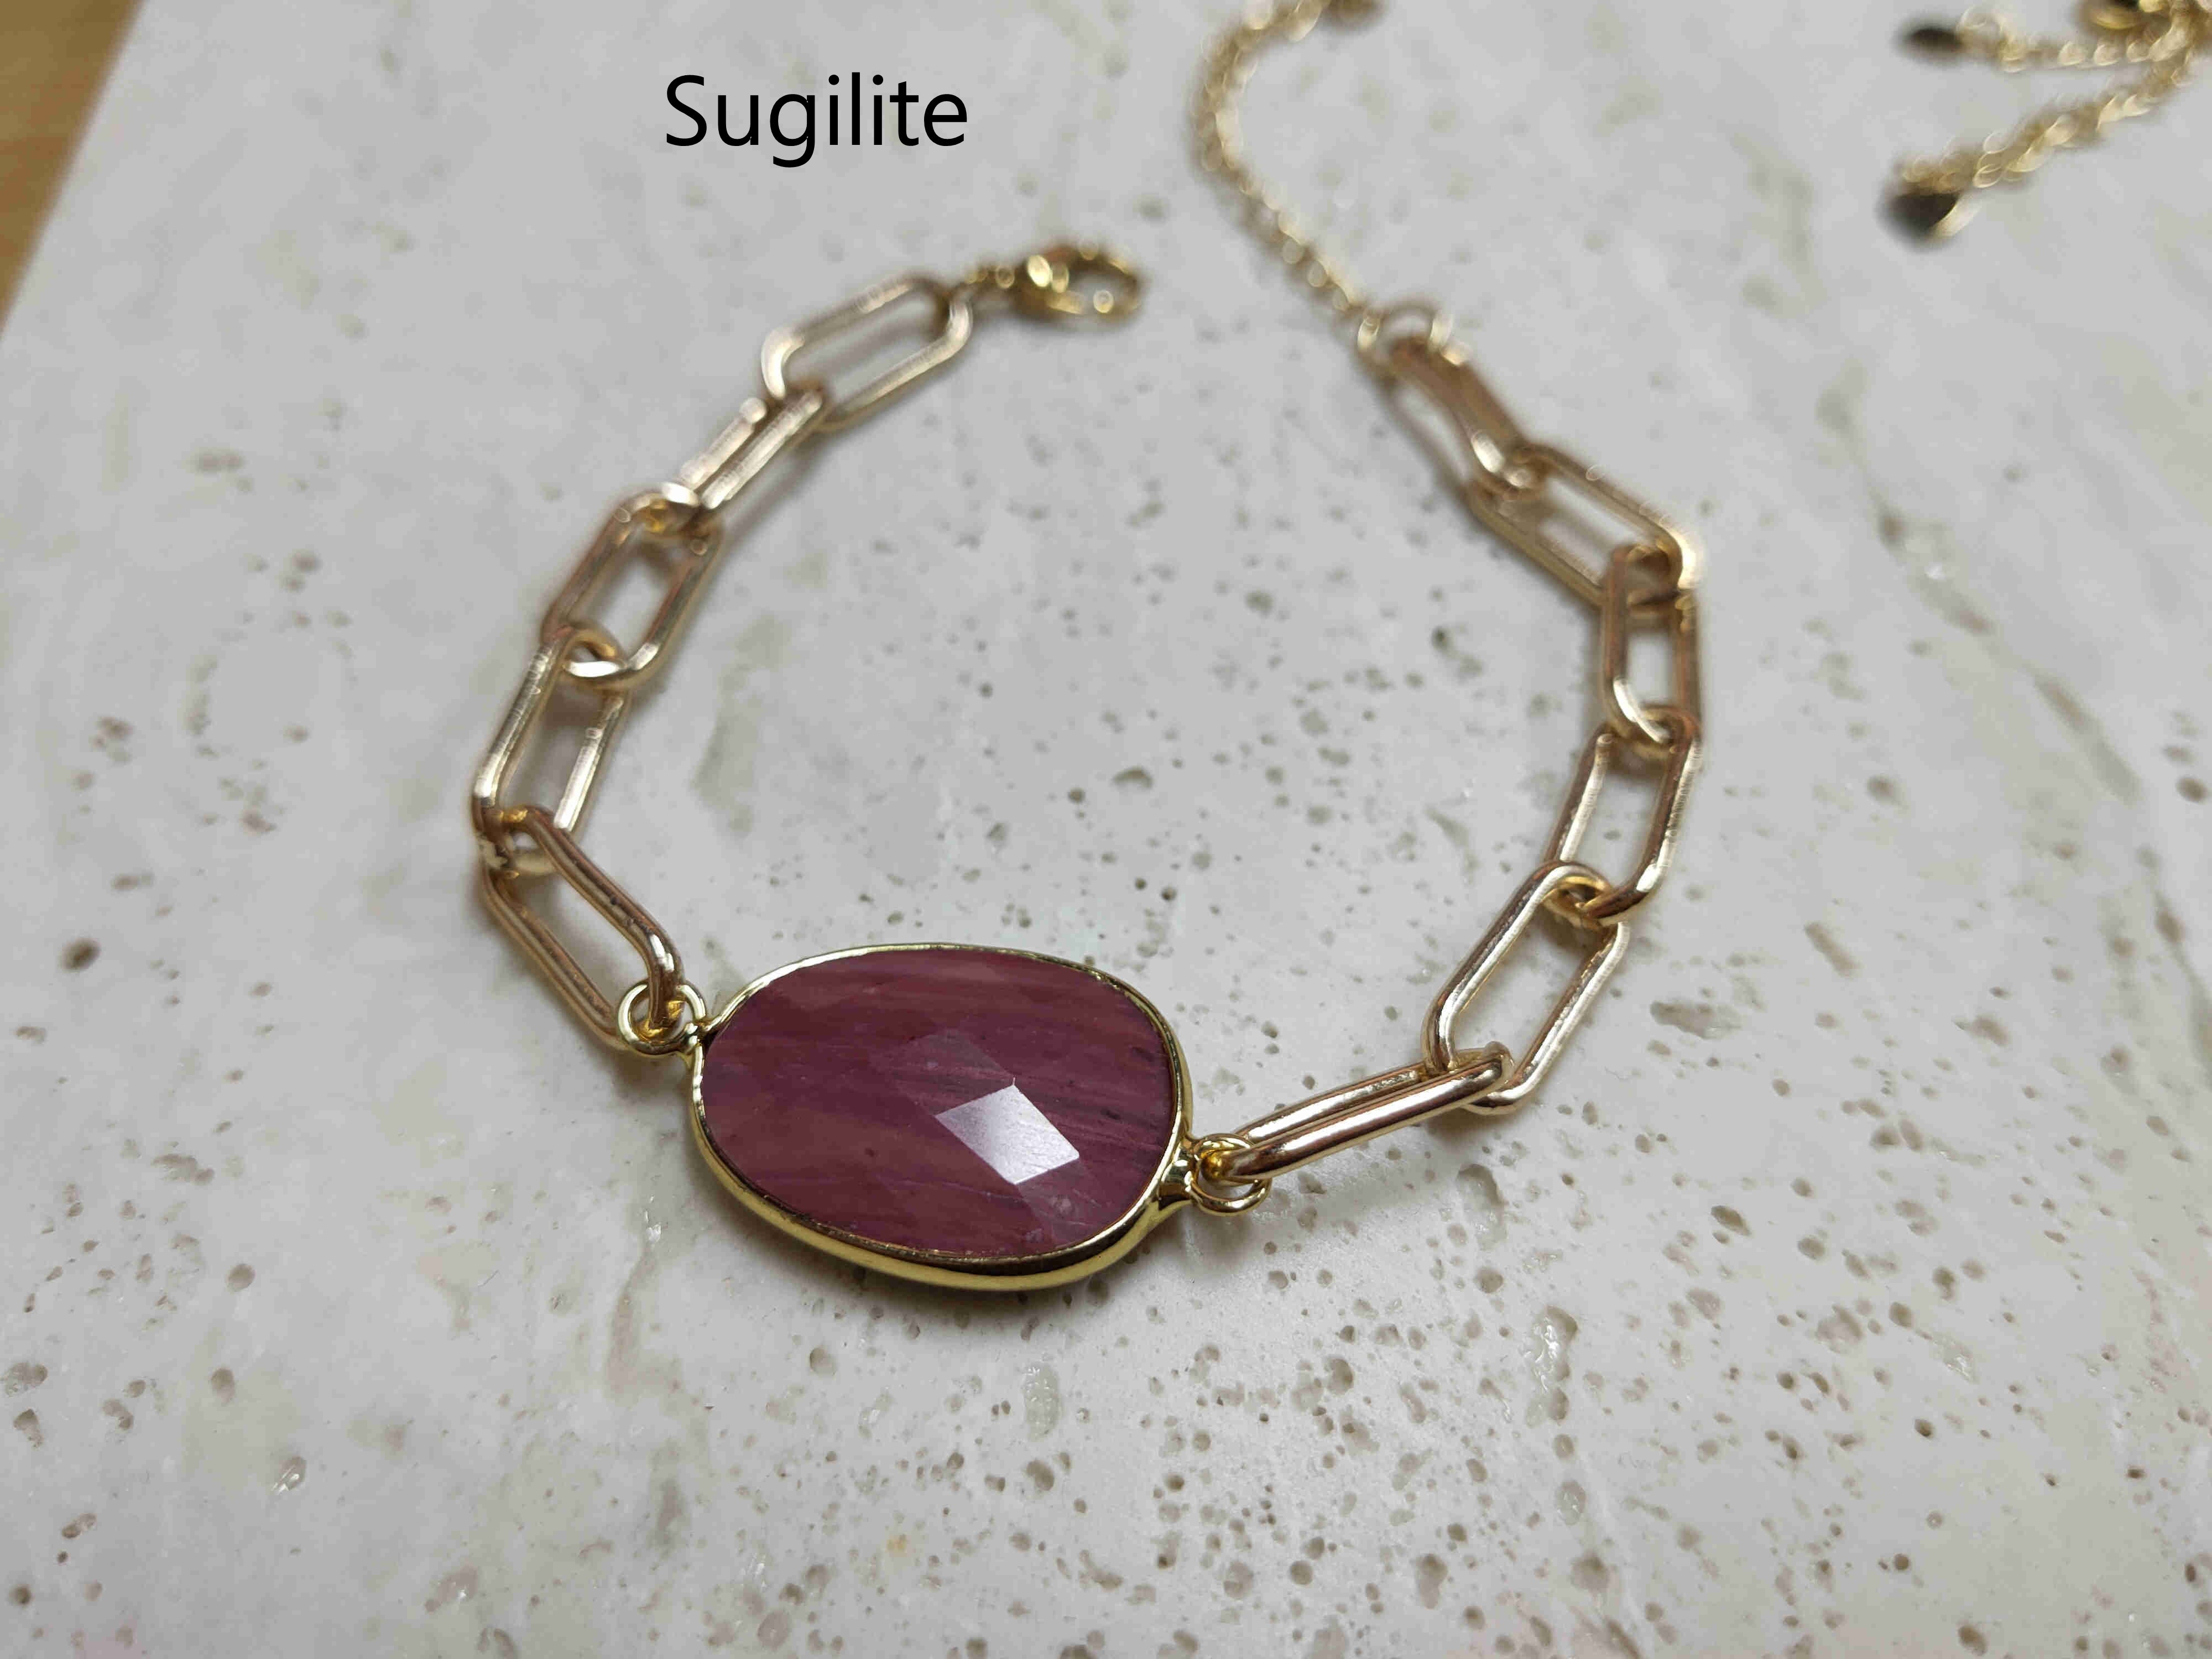 Gold Plated Oval Natural Gemstone Faceted Bracelet Paperclip Chain Crystal Bracelet Jewelry AL461